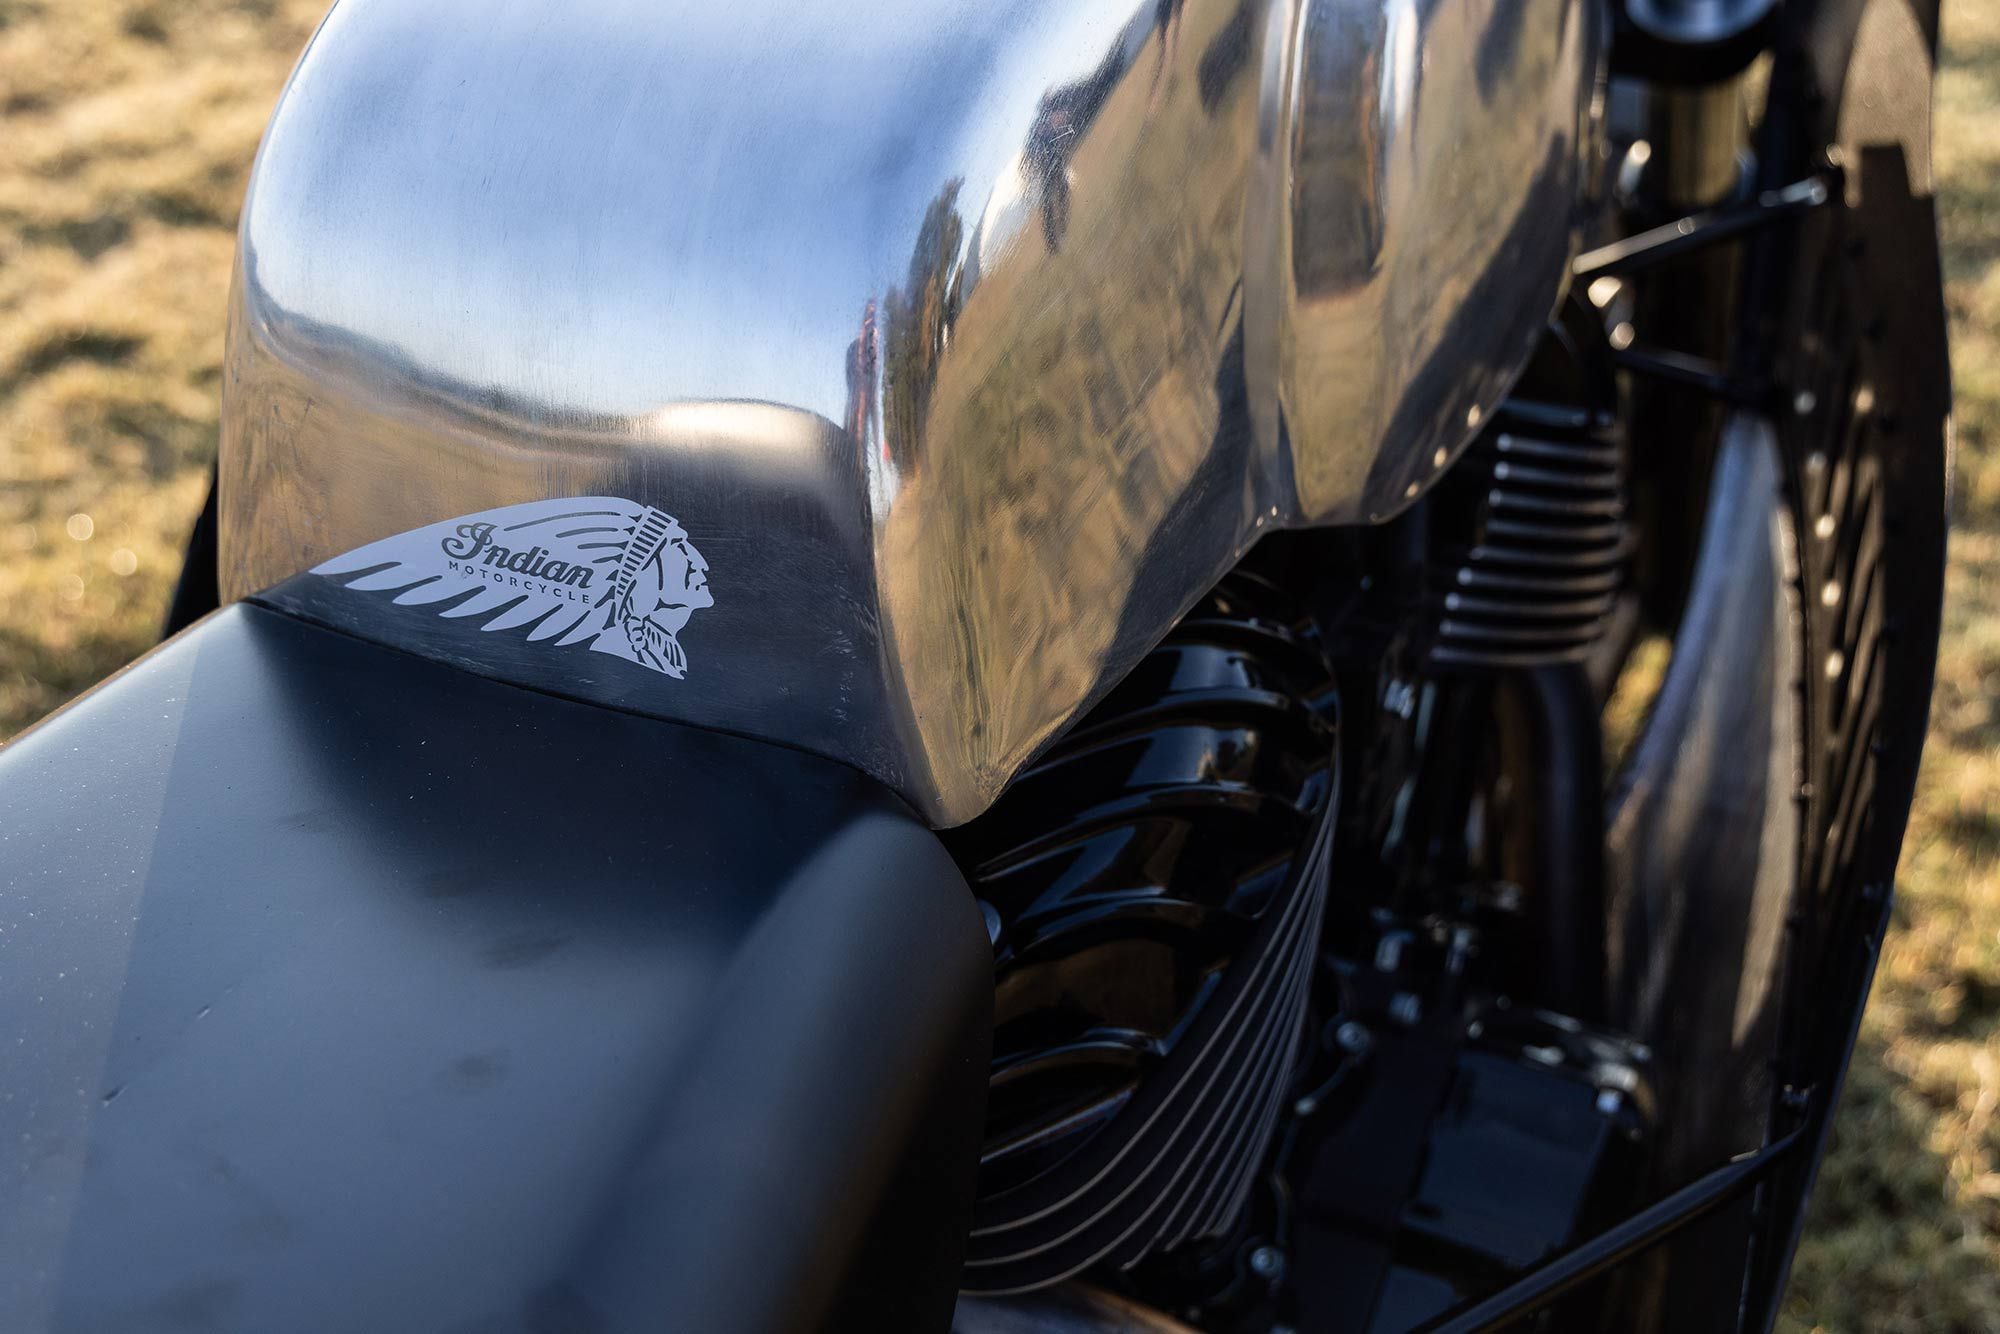 Indian Motorcycle’s headdress logo on the custom tank fabricated by Hindes.